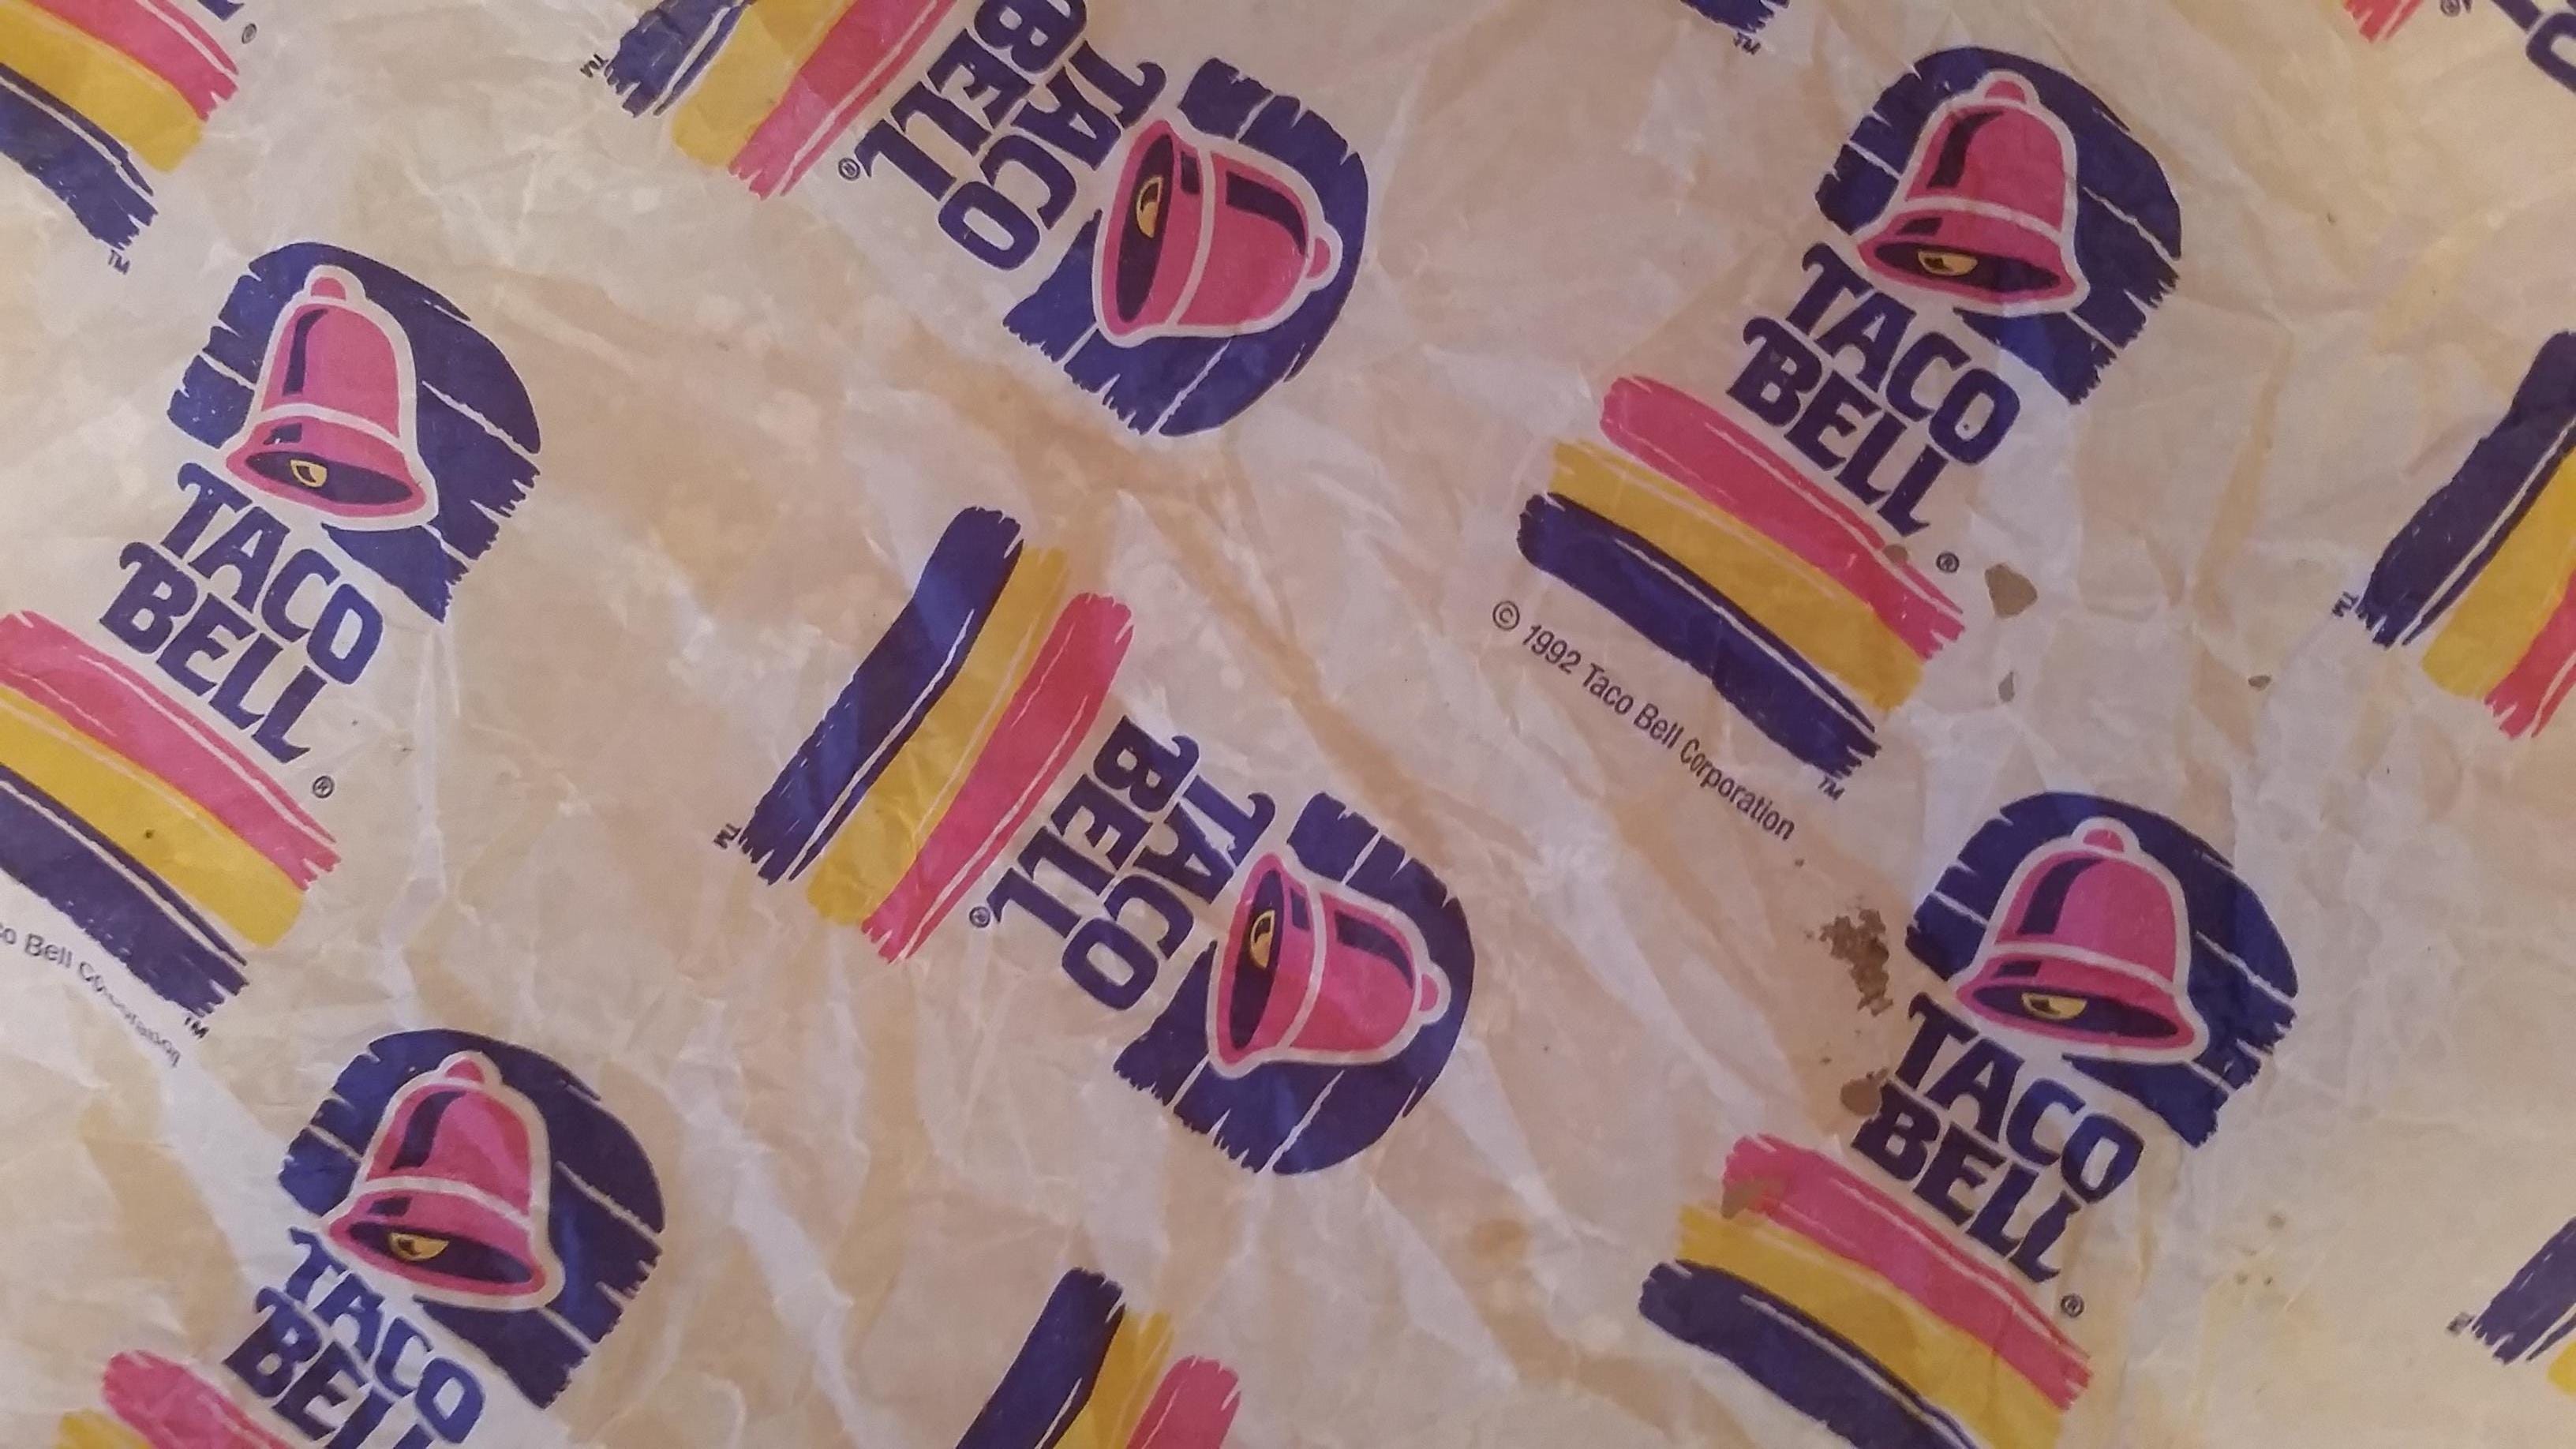 Taco Bell Defined My Entire Aesthetic - by Alex Sargeant